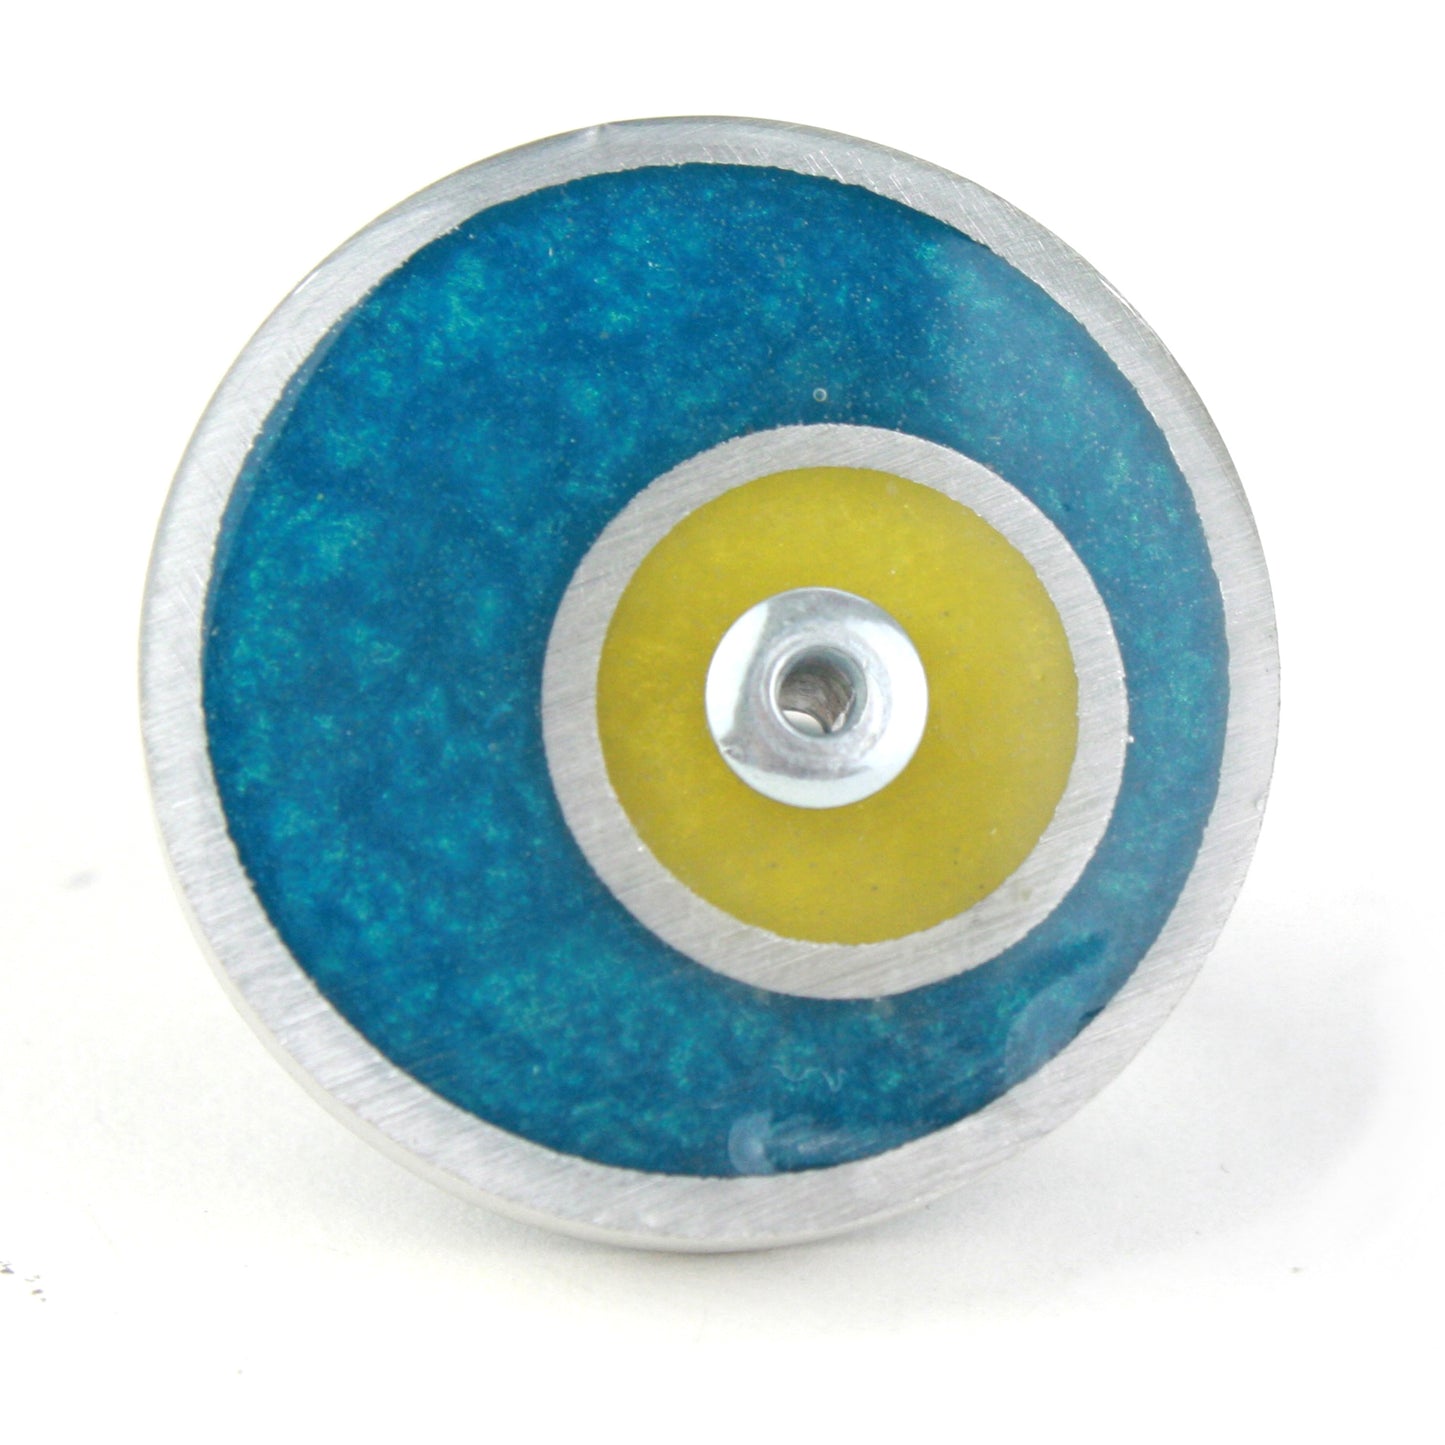 Resinique double circle ring - Blue-green and yellow